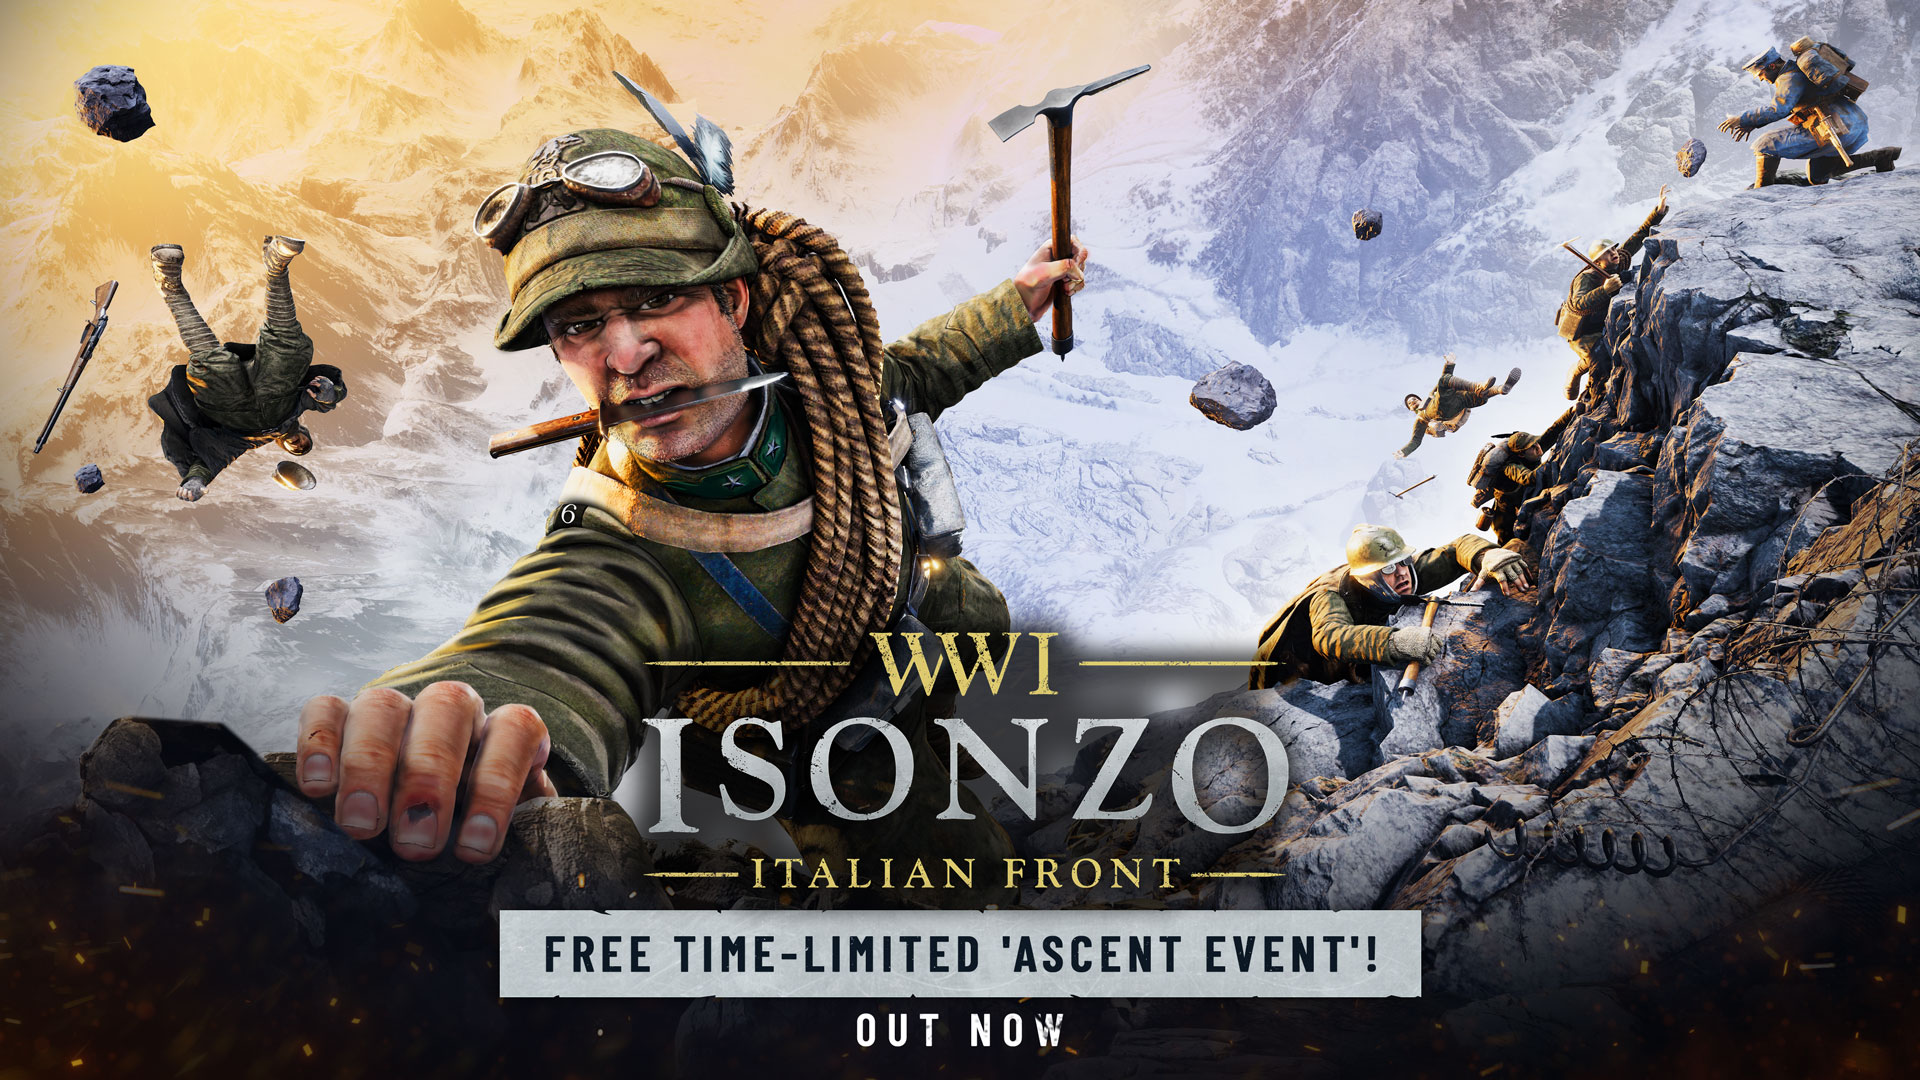 Climb for Victory in Isonzo’s Ascent Game Mode, Available until April 24